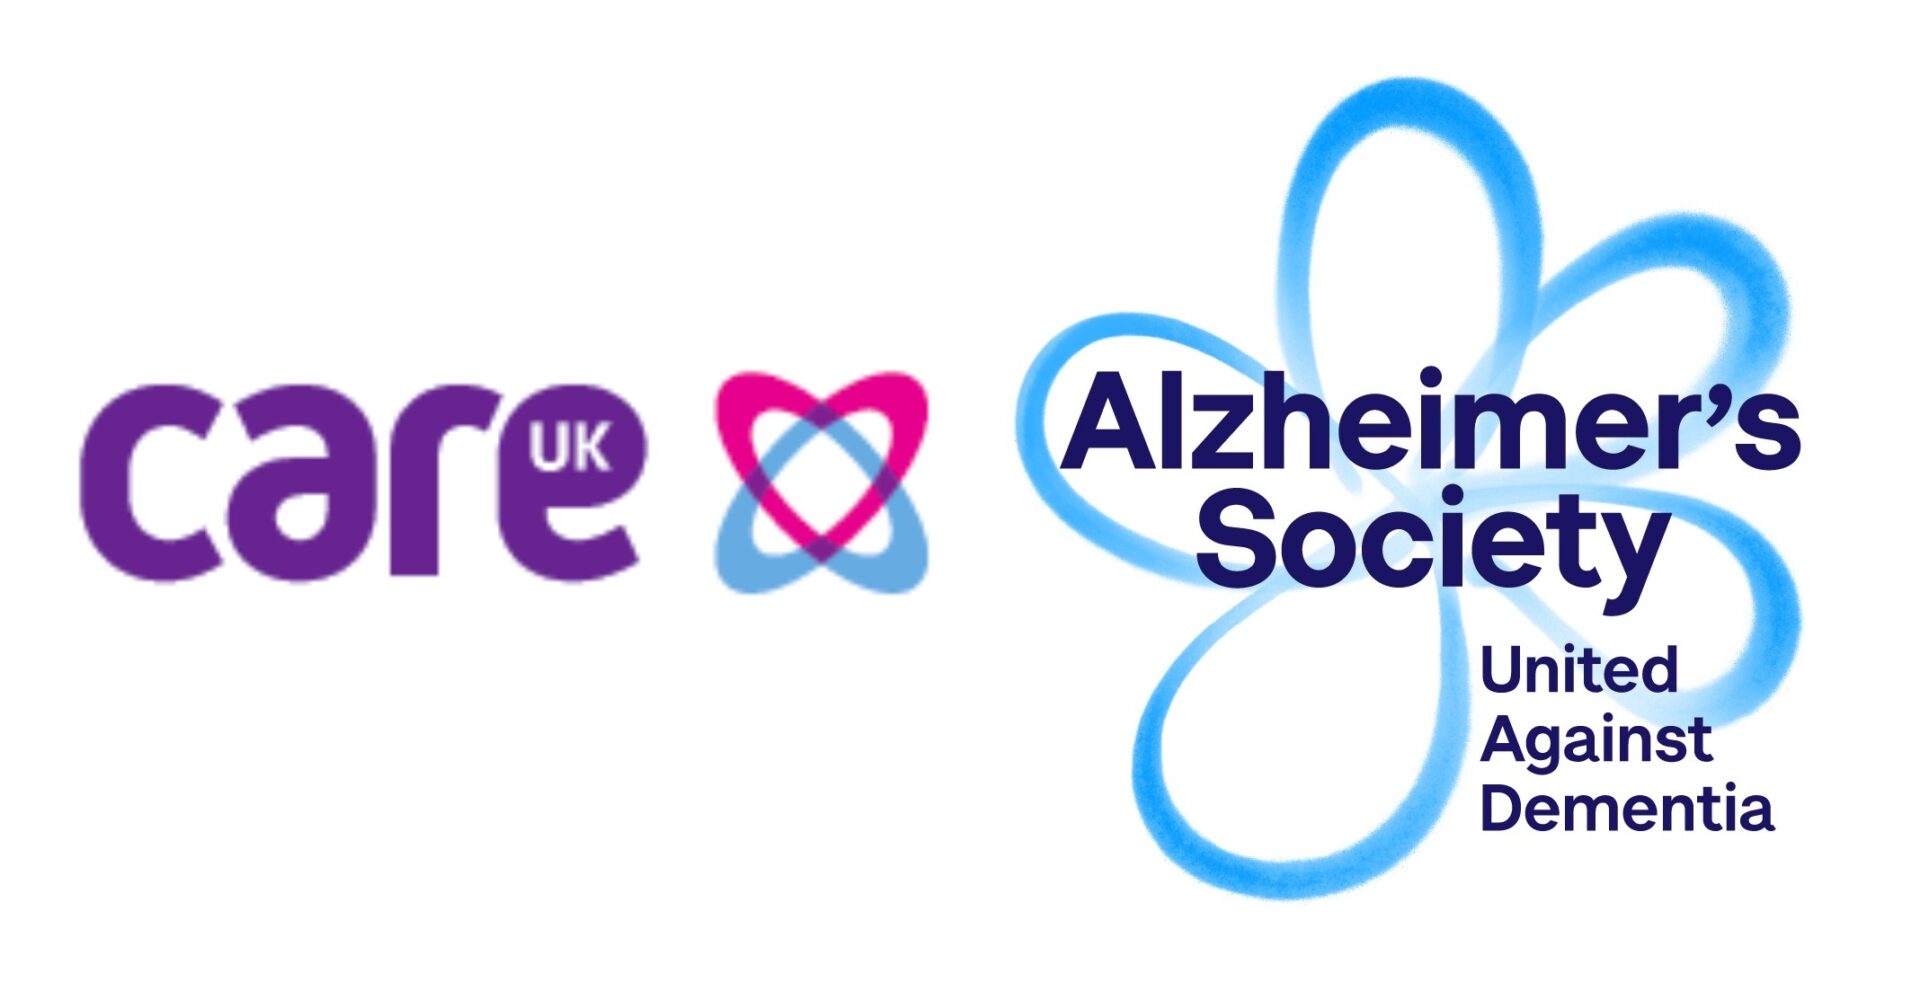 CareUk and Alzheimers Society logos